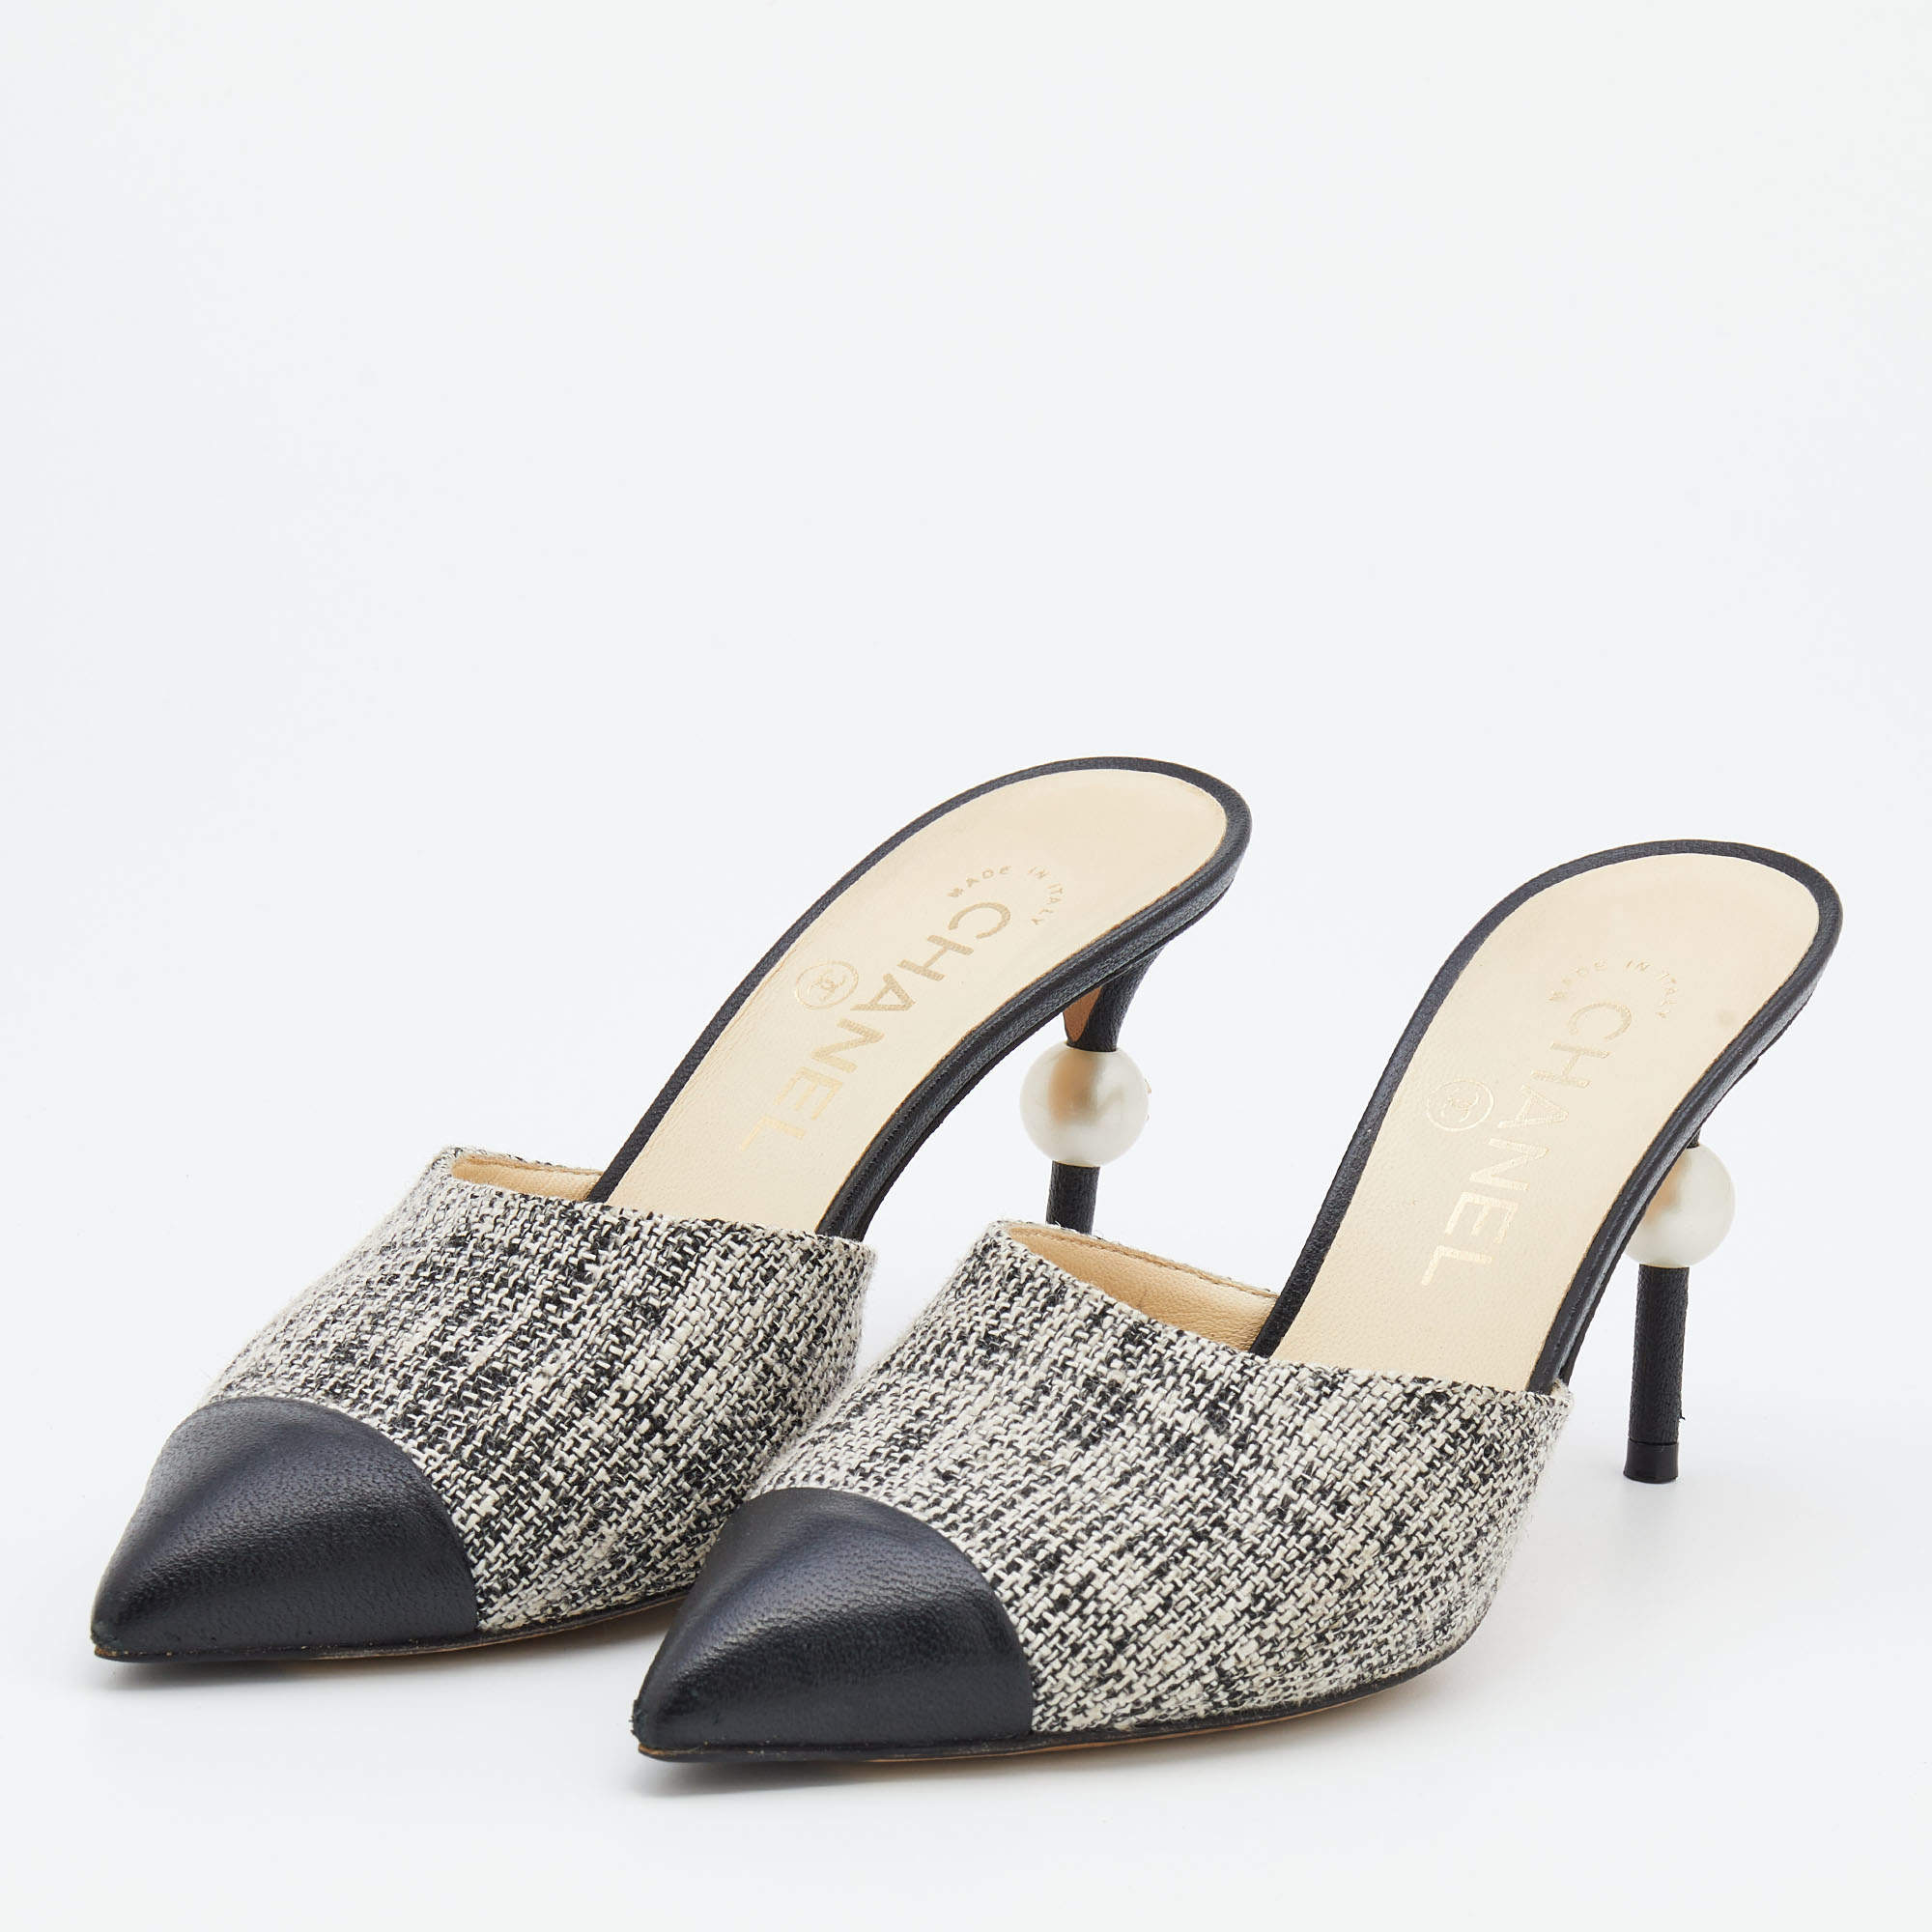 Chanel Tweed Sandals - 8 For Sale on 1stDibs  chanel cotton tweed sandals, chanel  tweed mule